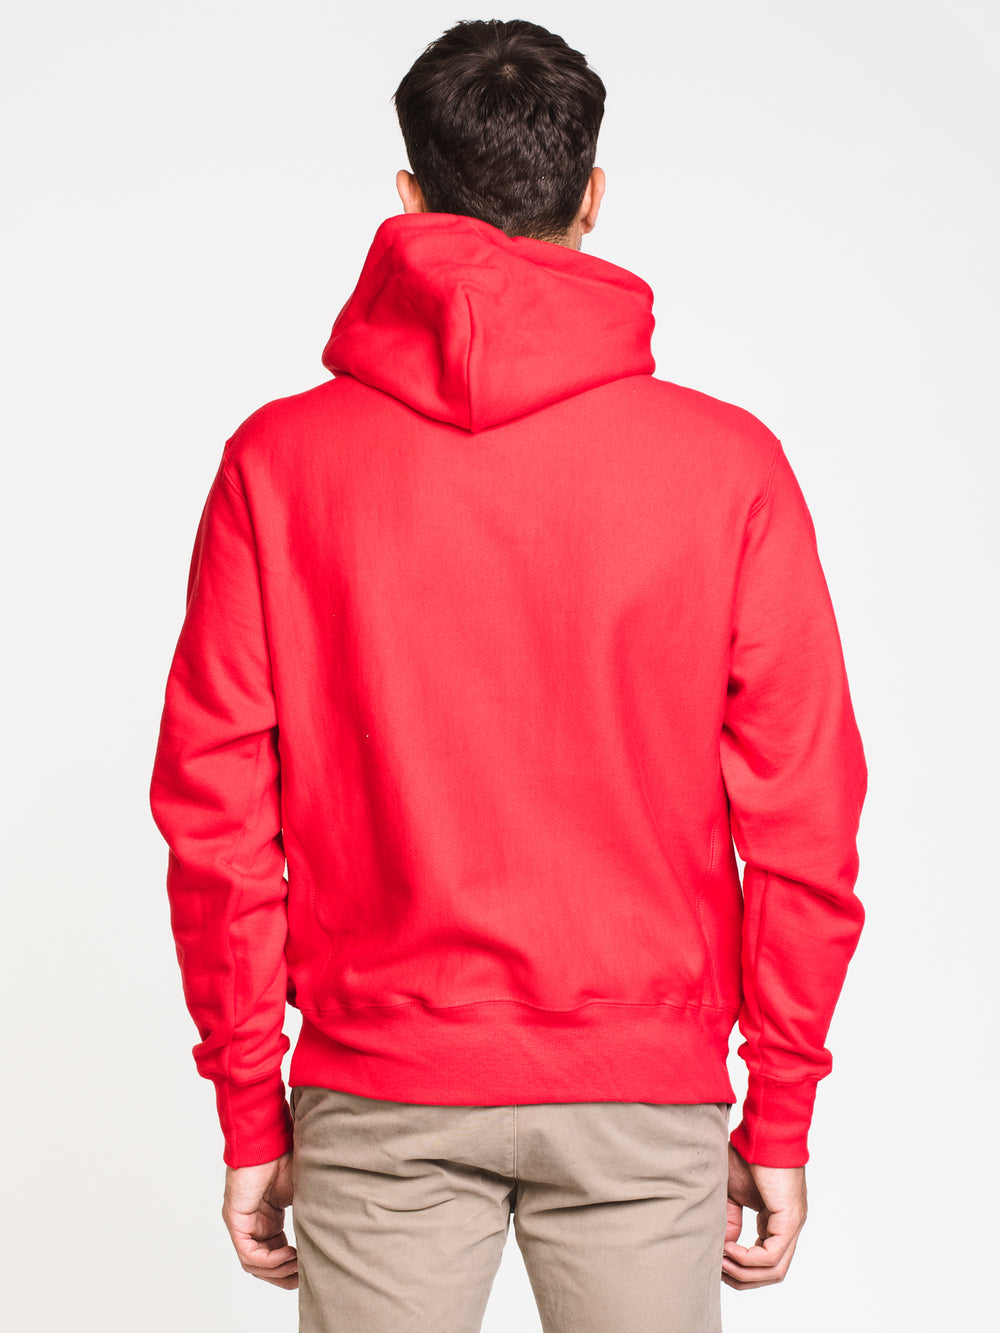 MENS RW PULLOVER HOODIE- SCARLET RED - CLEARANCE